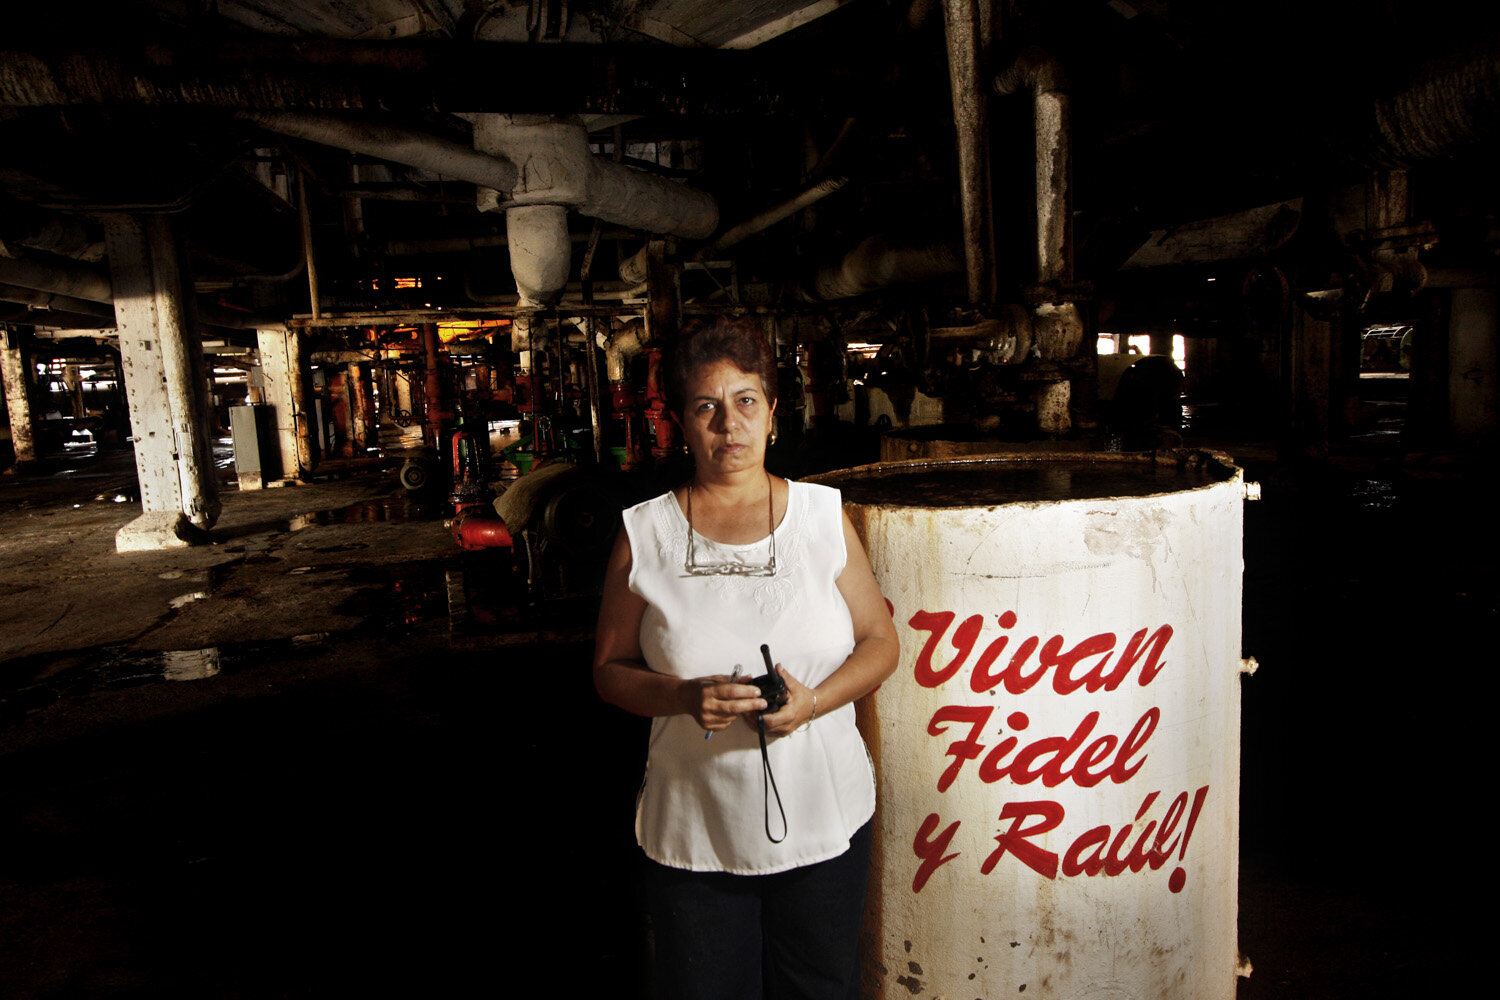  Mayra, 52, director of ta sugarcane factory, poses for a portrait next to a tank that has written on it: Long Live Fidel and Raul (Vivan Fidel y Raul). She has been working for 28  years in the sugarcane industry. 